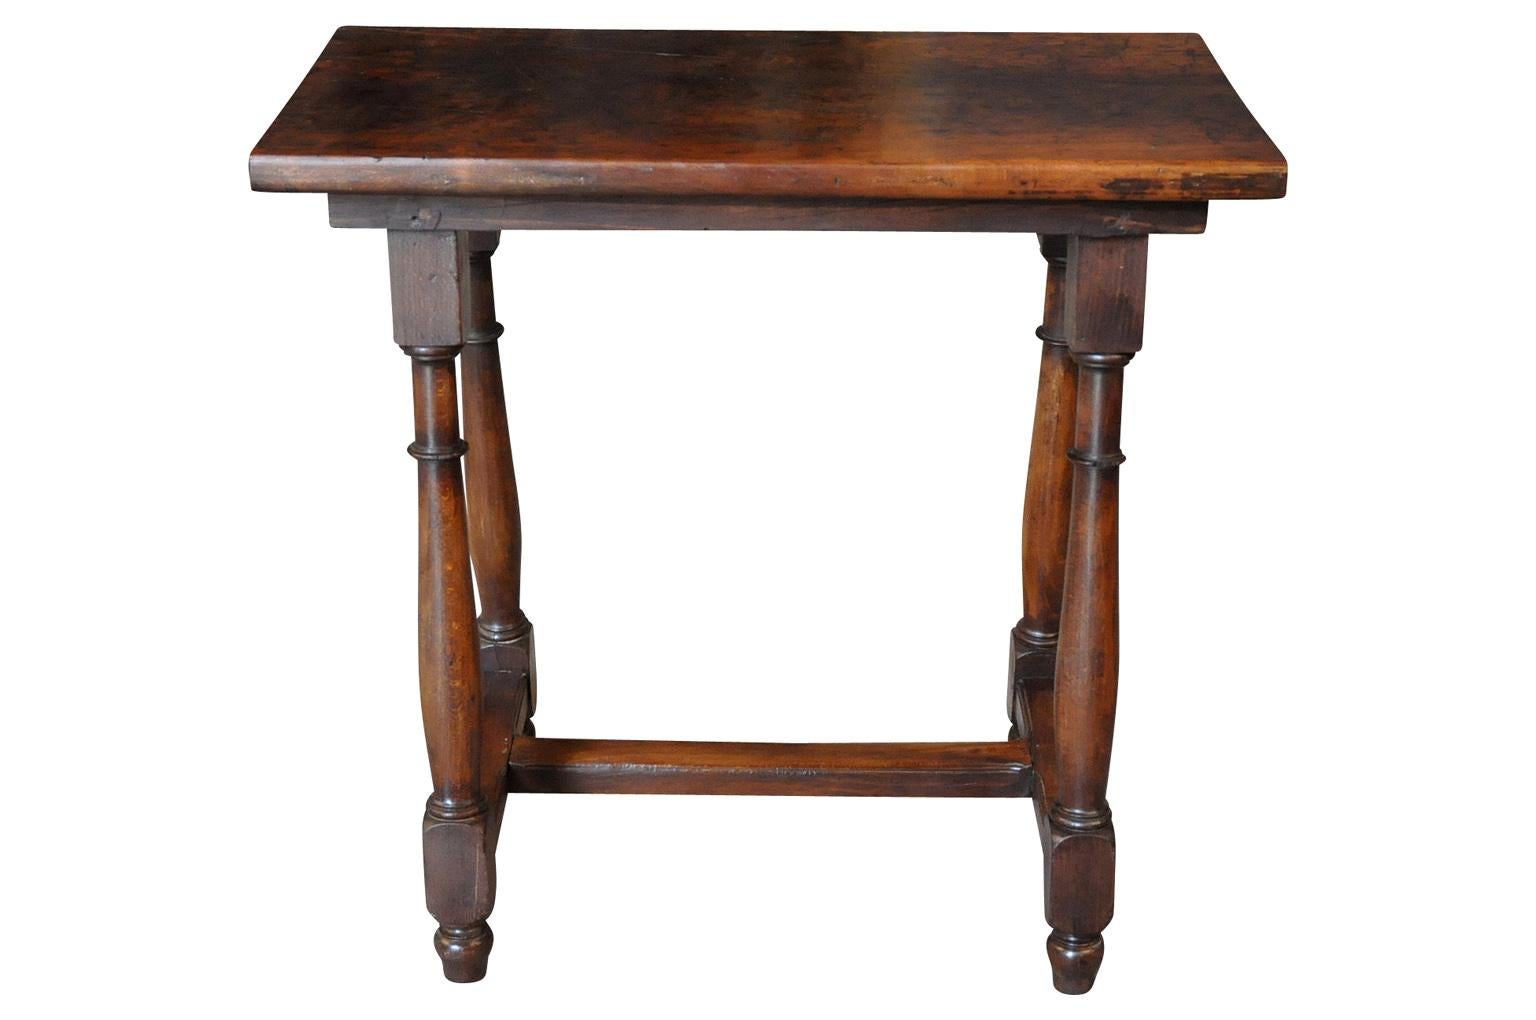 A stunning 18th century diminutive console - side table from the Catalan region of Spain. Wonderfully constructed from walnut with exceptional patina. Solid board top.